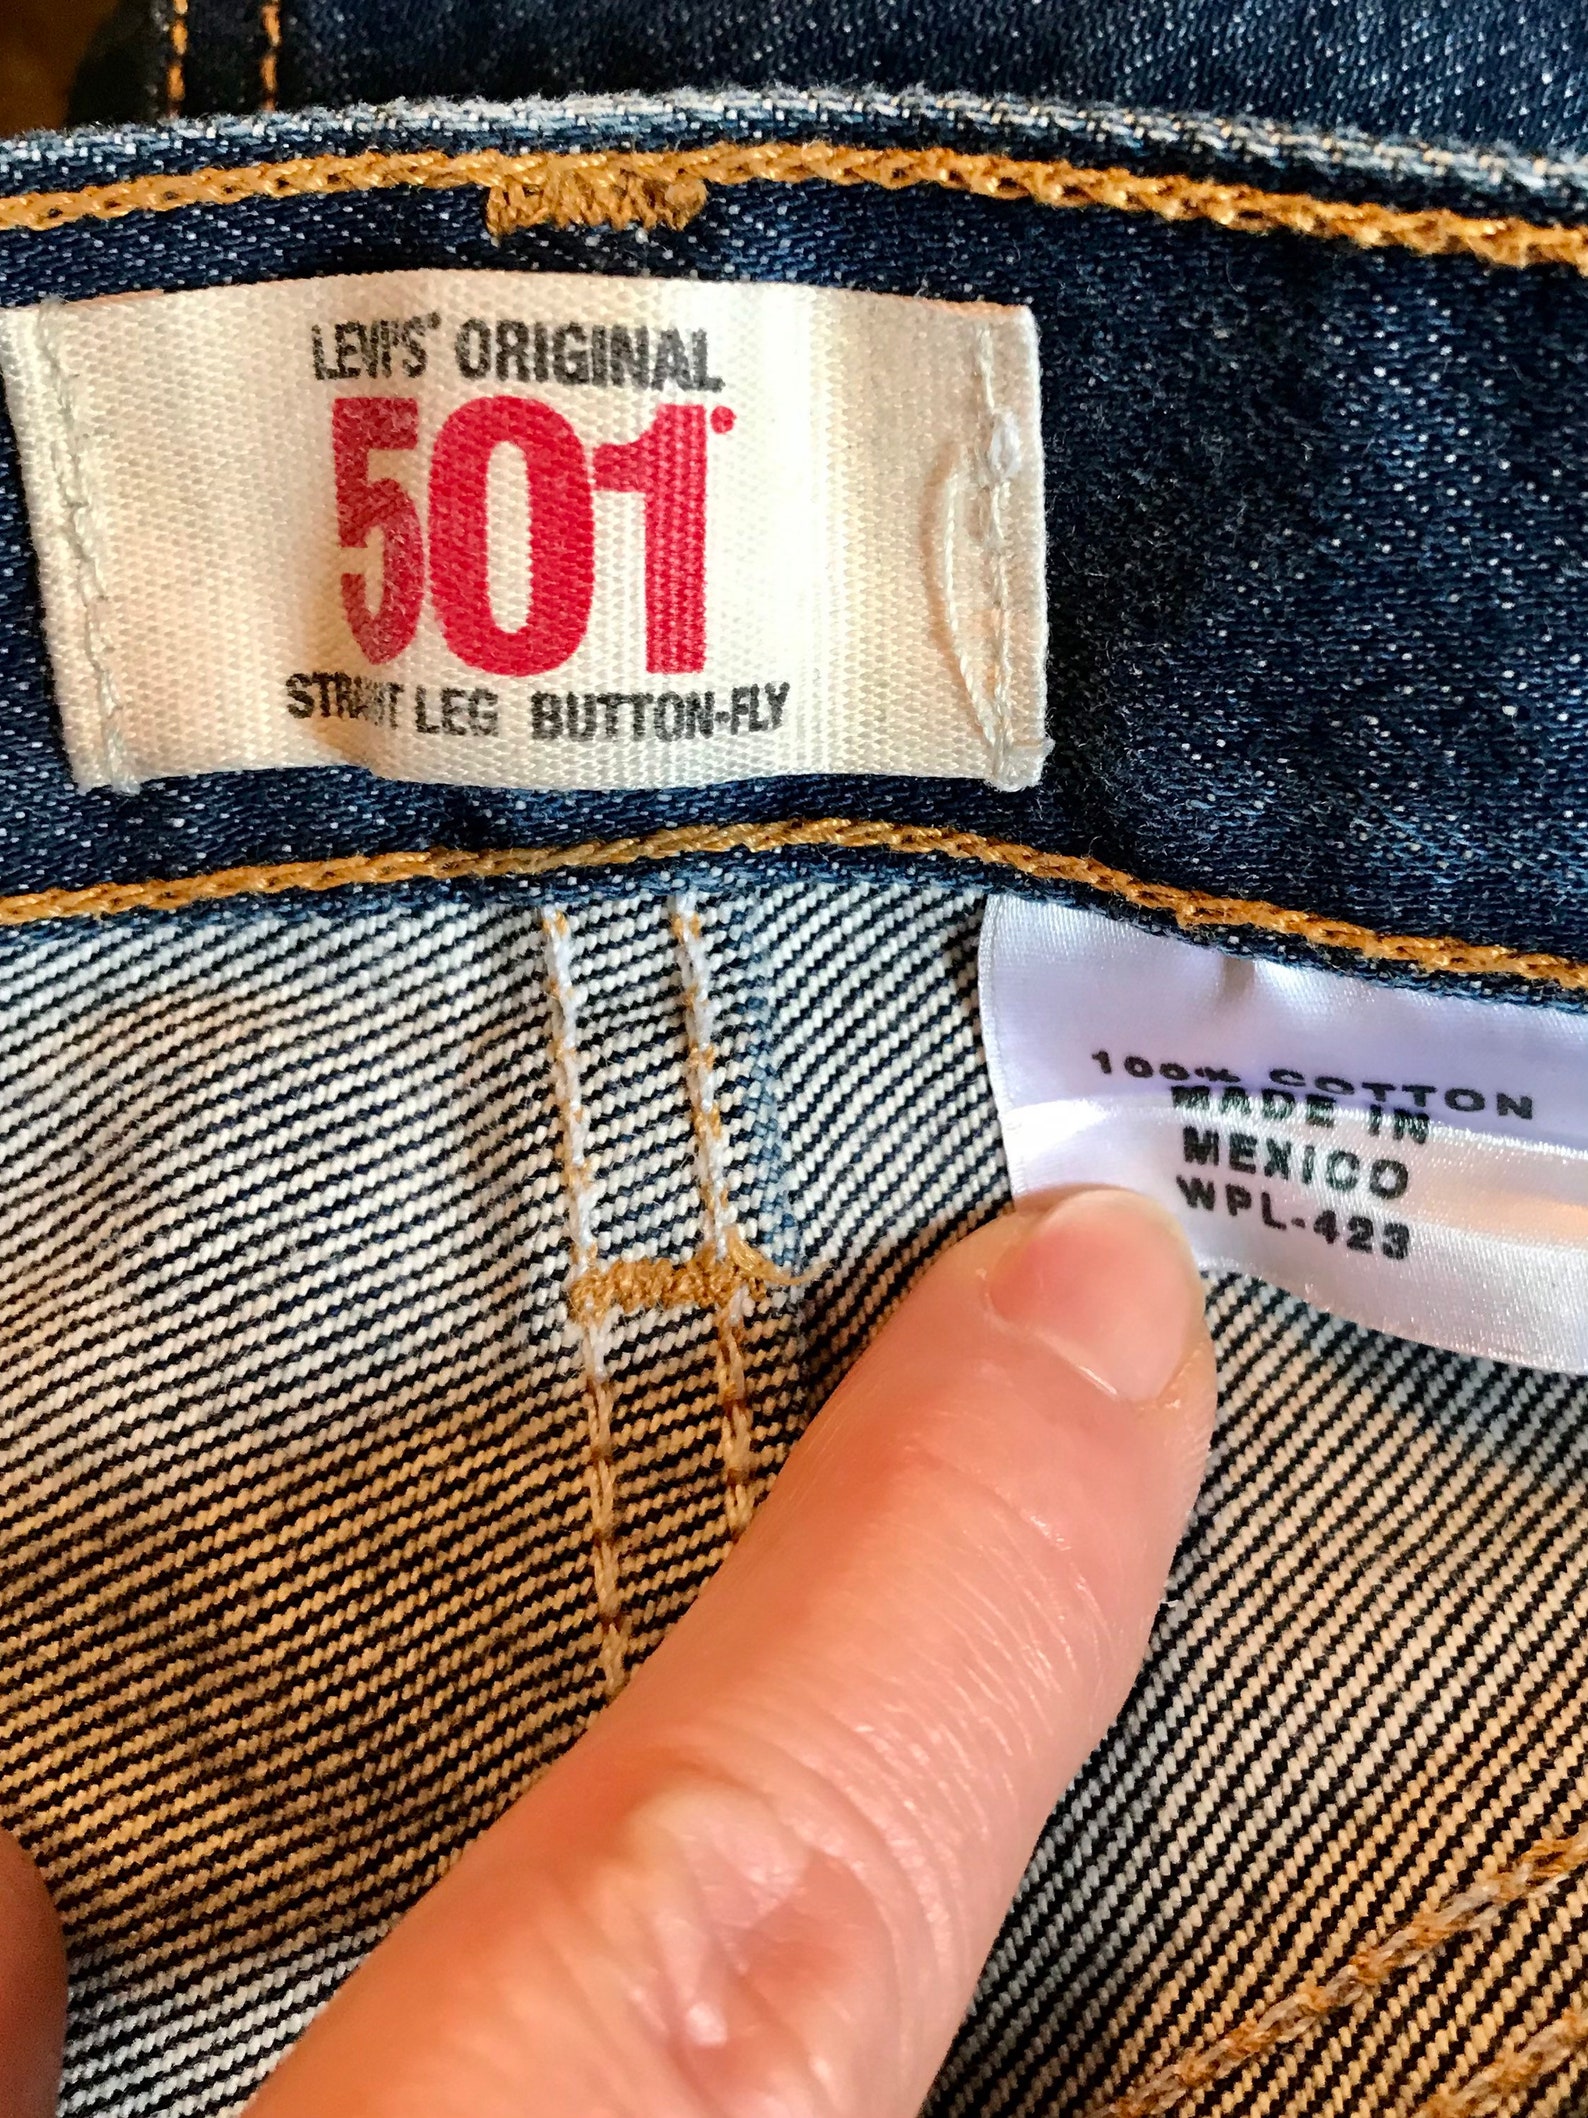 Vintage Levis 501 Button Fly Shrink-to-Fit Jeans 36x32 | Etsy